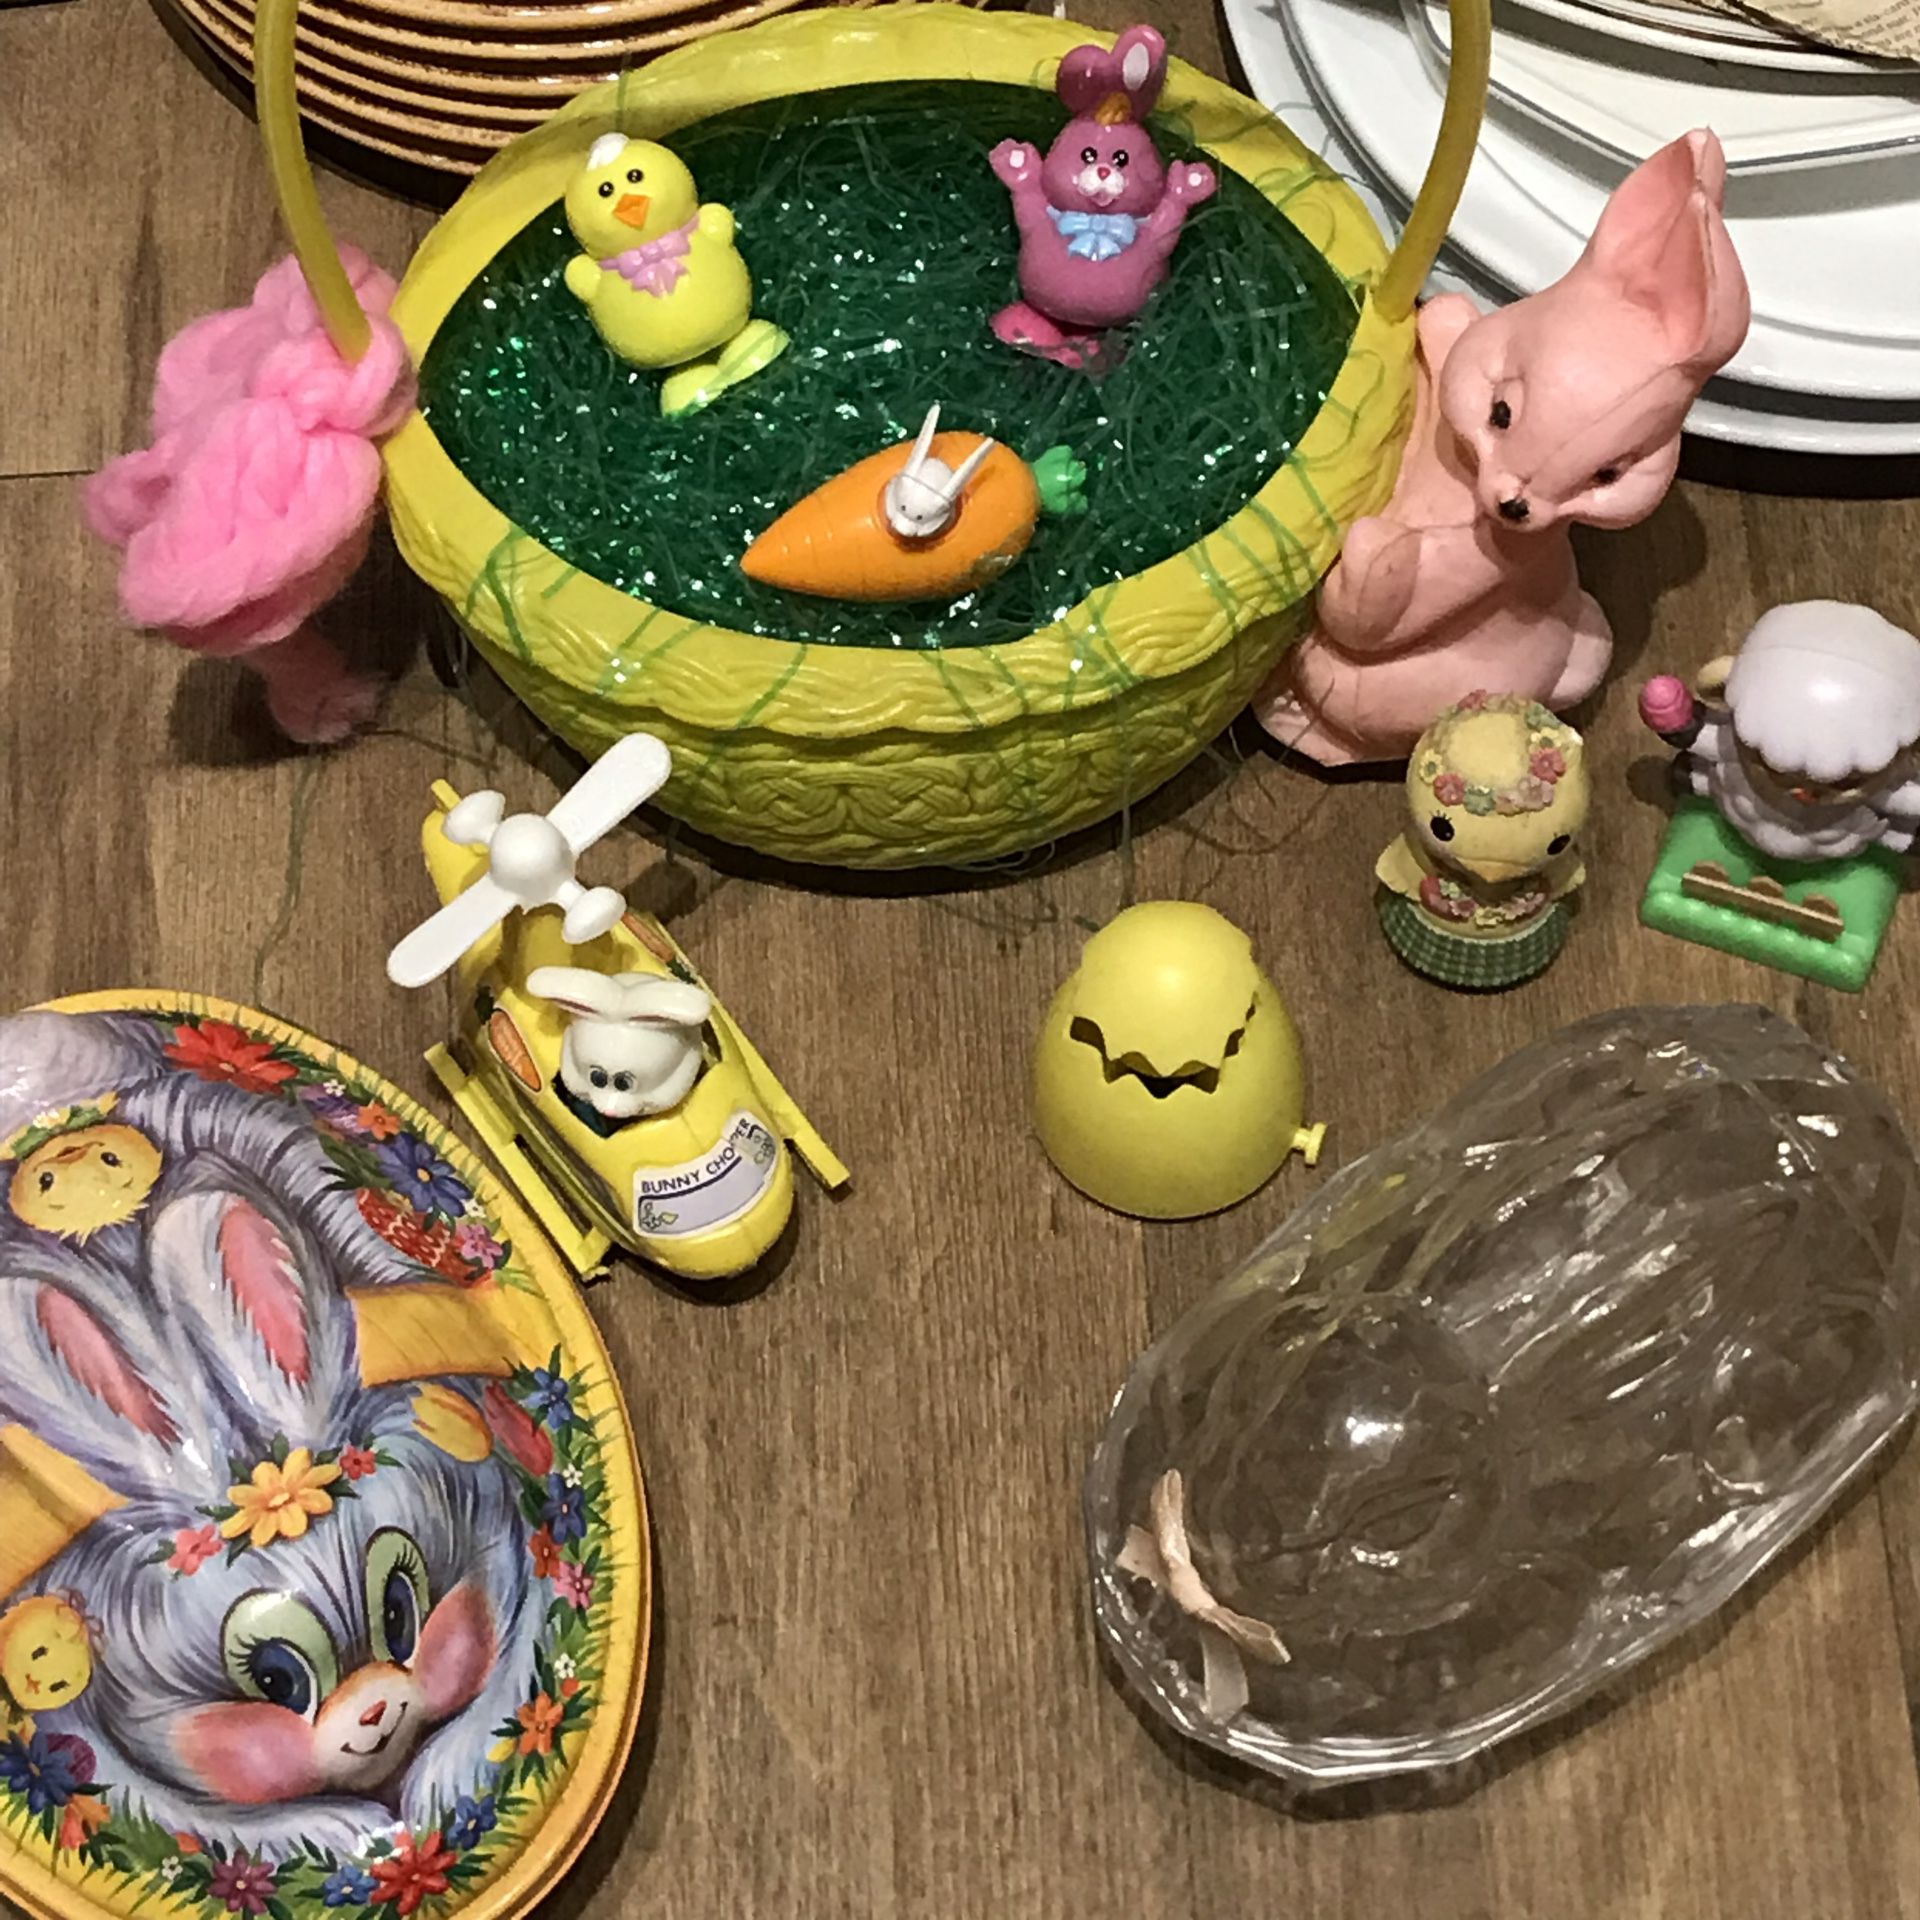 Easter basket toys decorations vintage 1970s and 80s